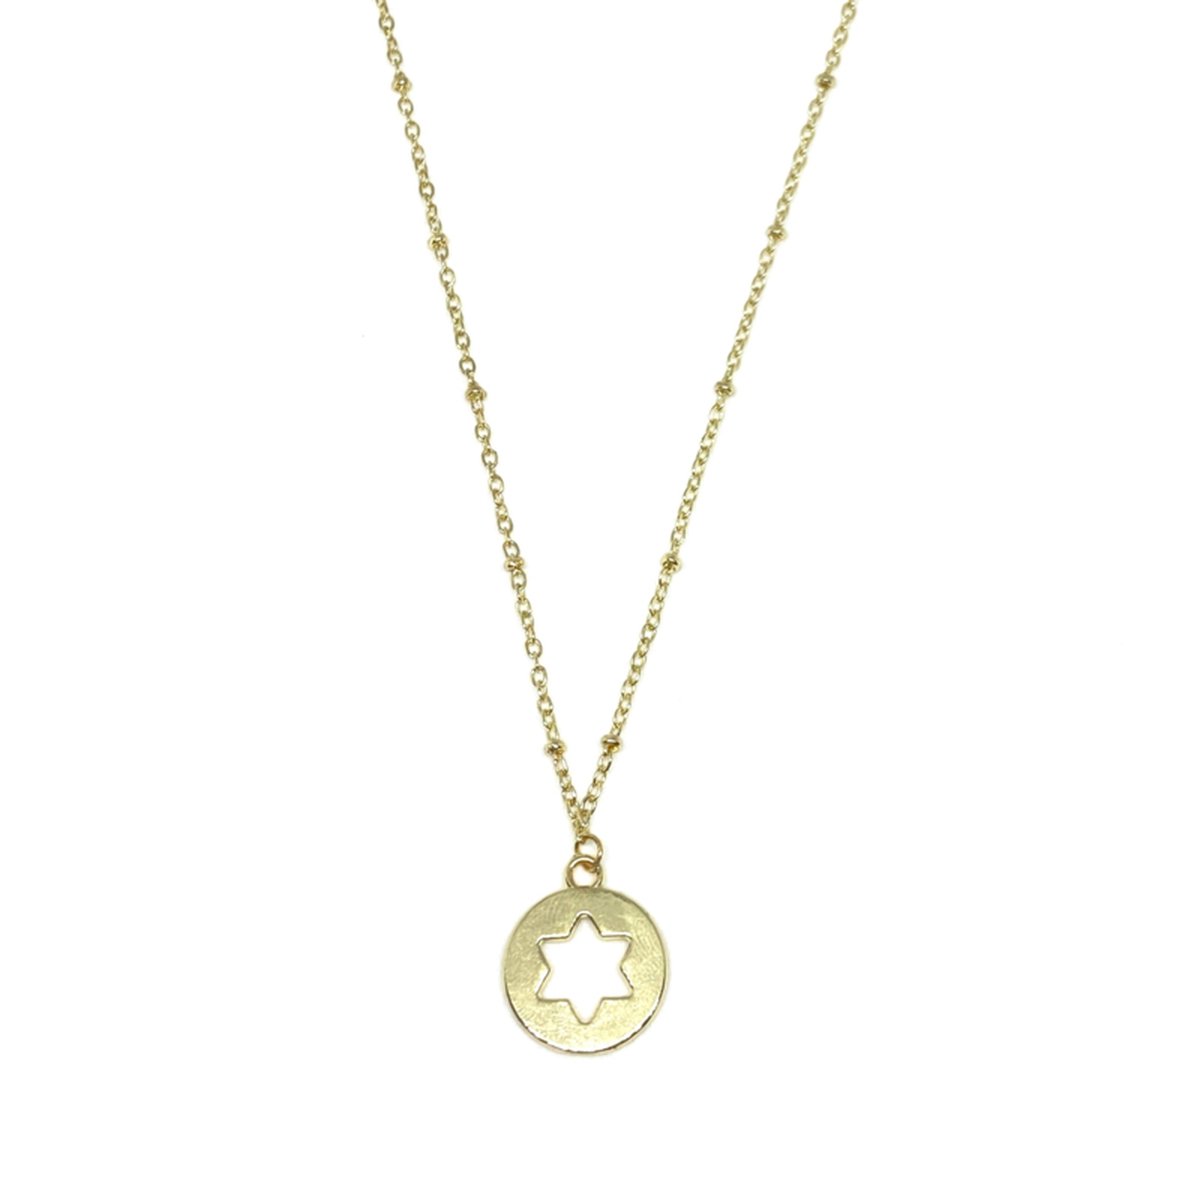 Open star coin necklace - gold